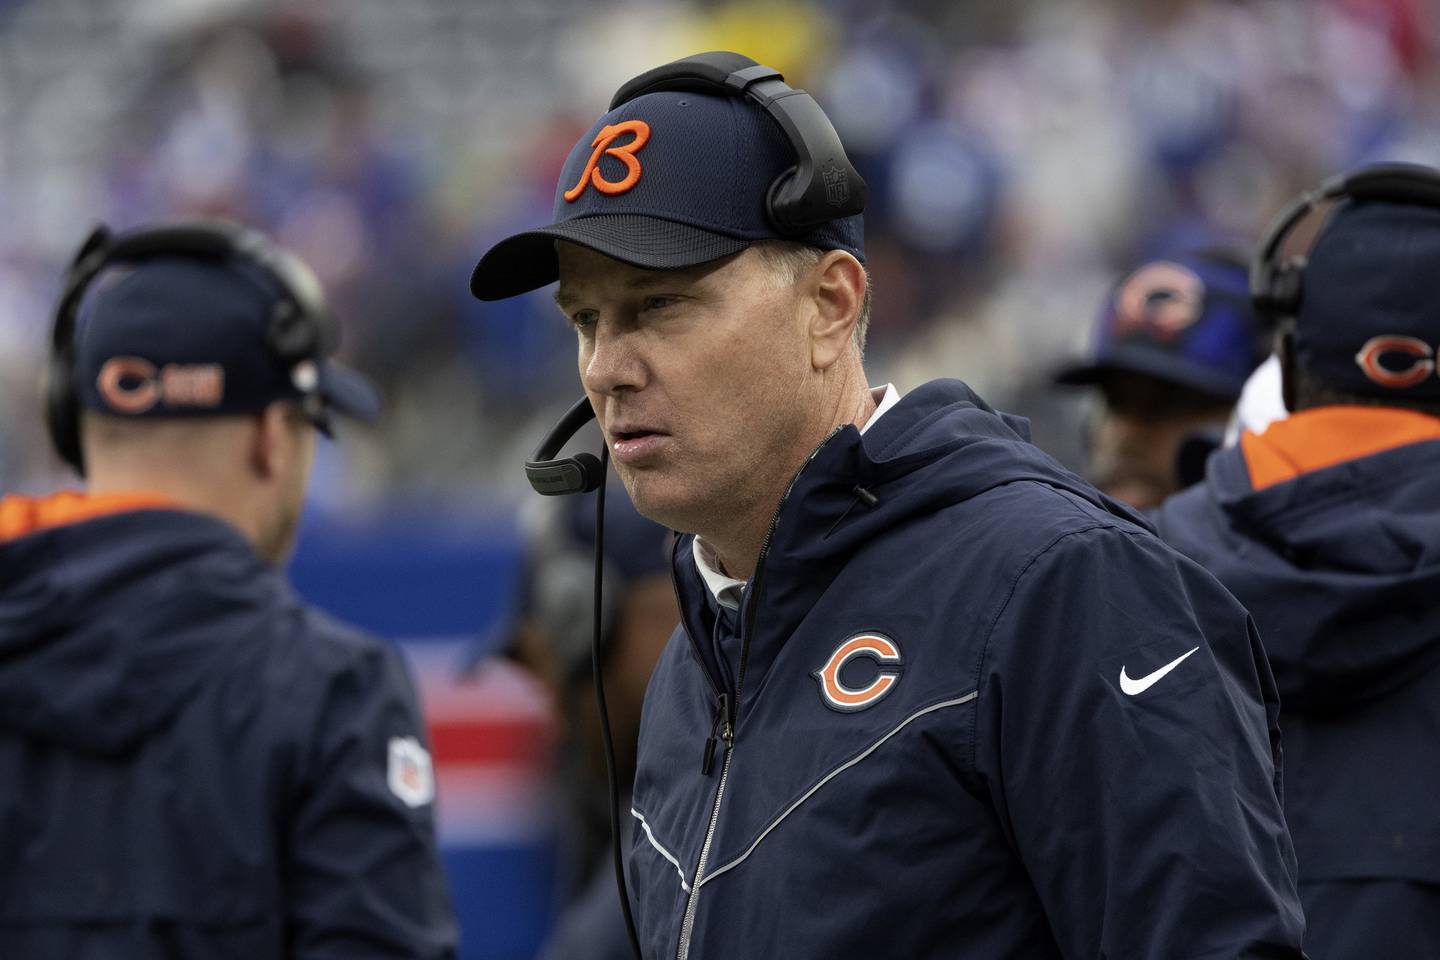 Bears coach Matt Eberflus during the fourth quarter of the game against the Giants on Oct. 12, 2022.